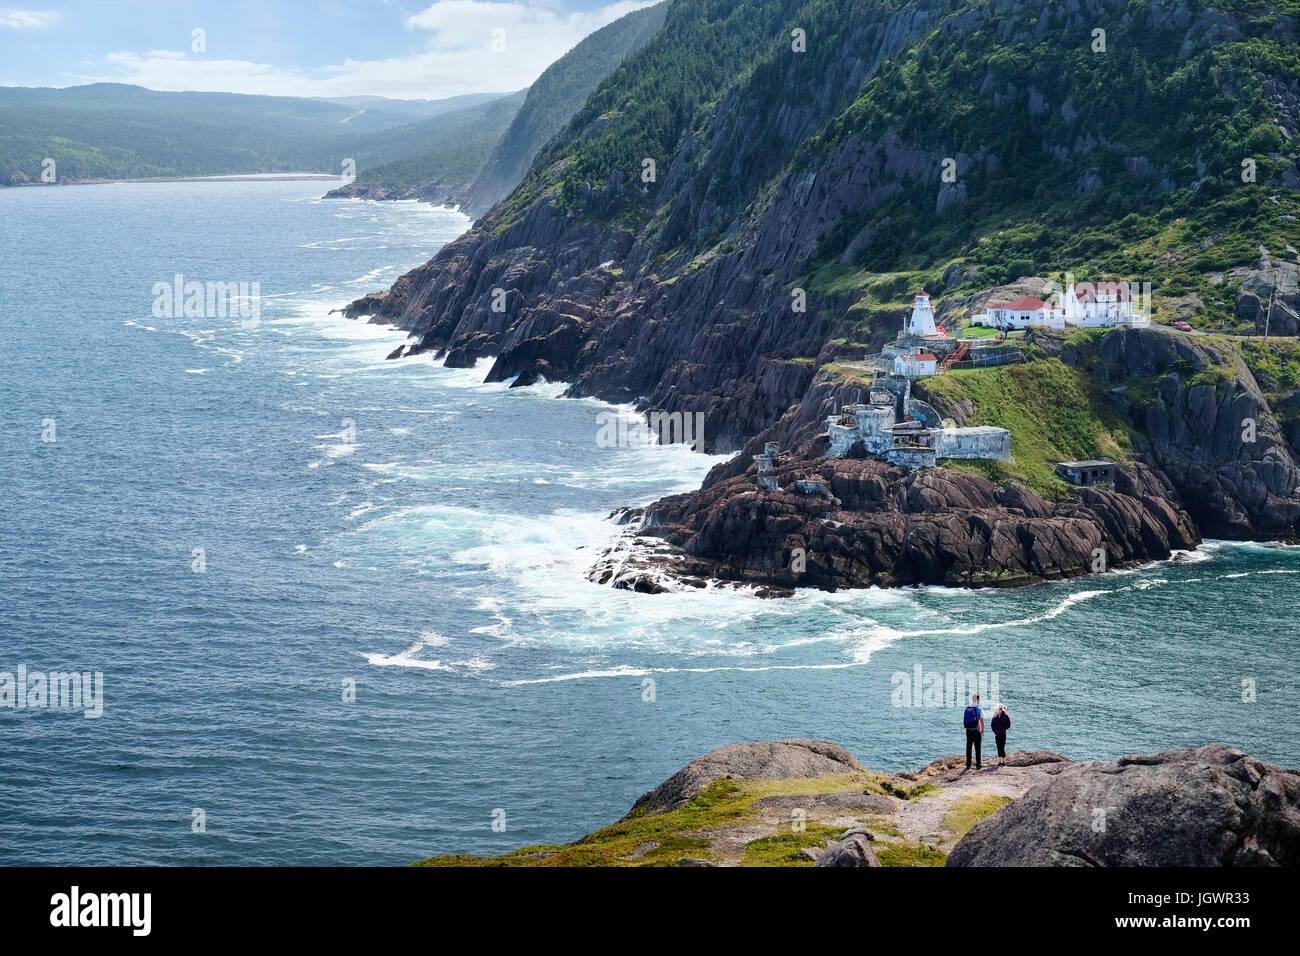 Couple looking out from coastal cliff, St John's, Newfoundland, Canada Stock Photo